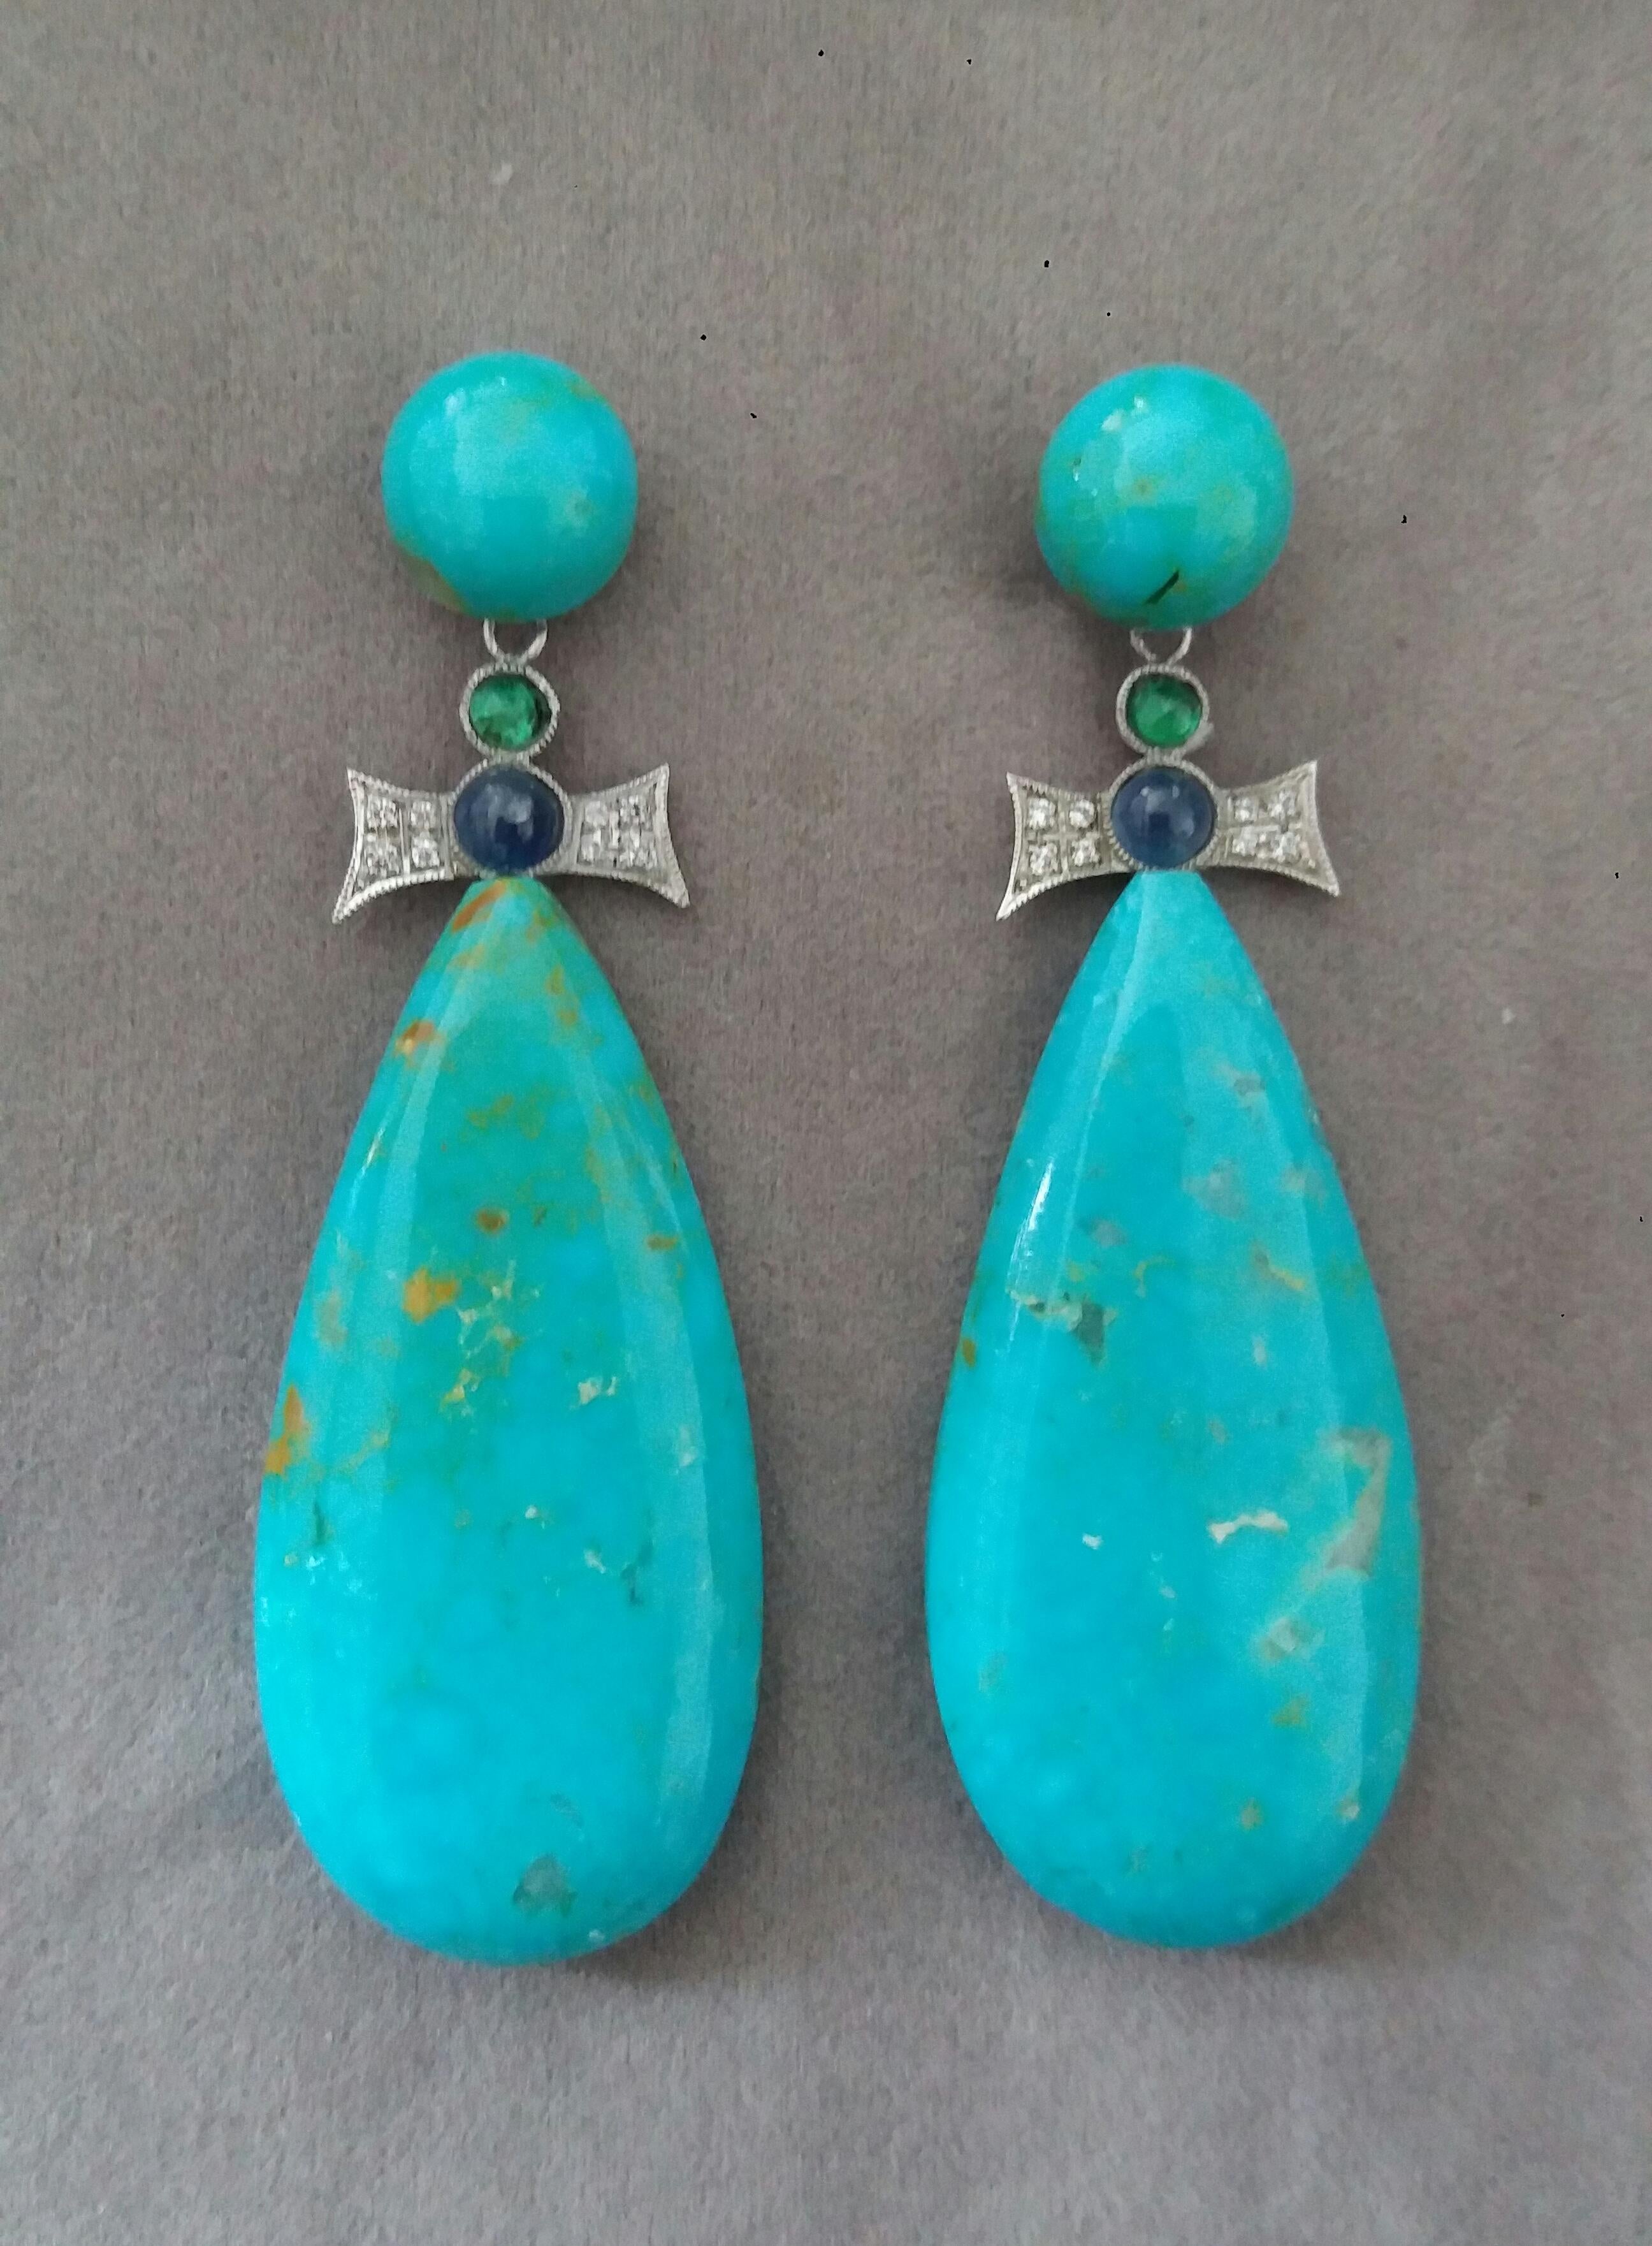 In these Art Deco Style handmade earrings 2 good quality Natural Turquoise plain drops measuring 20 x 43 mm. are suspended from 2 bow shape 14 kt white gold elements with 16 full cut round Diamonds , Blue Sapphires and Emeralds small round